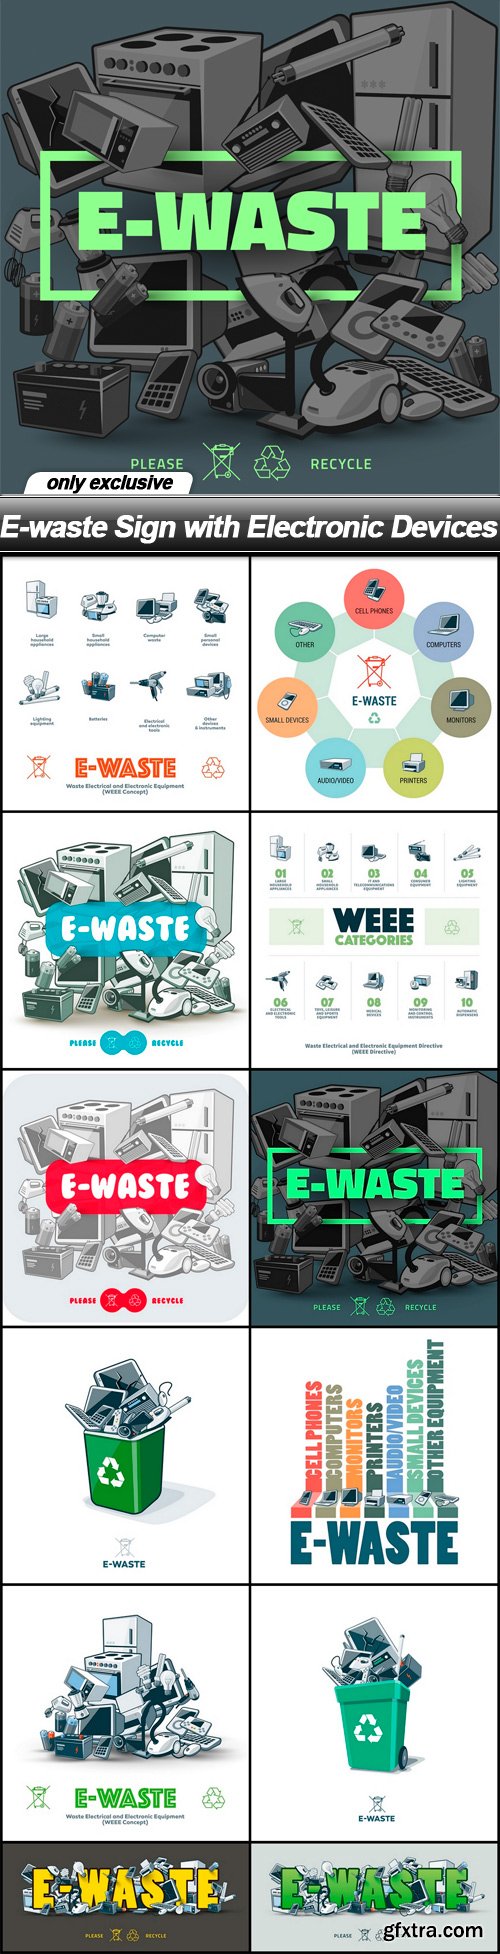 E-waste Sign with Electronic Devices - 12 EPS